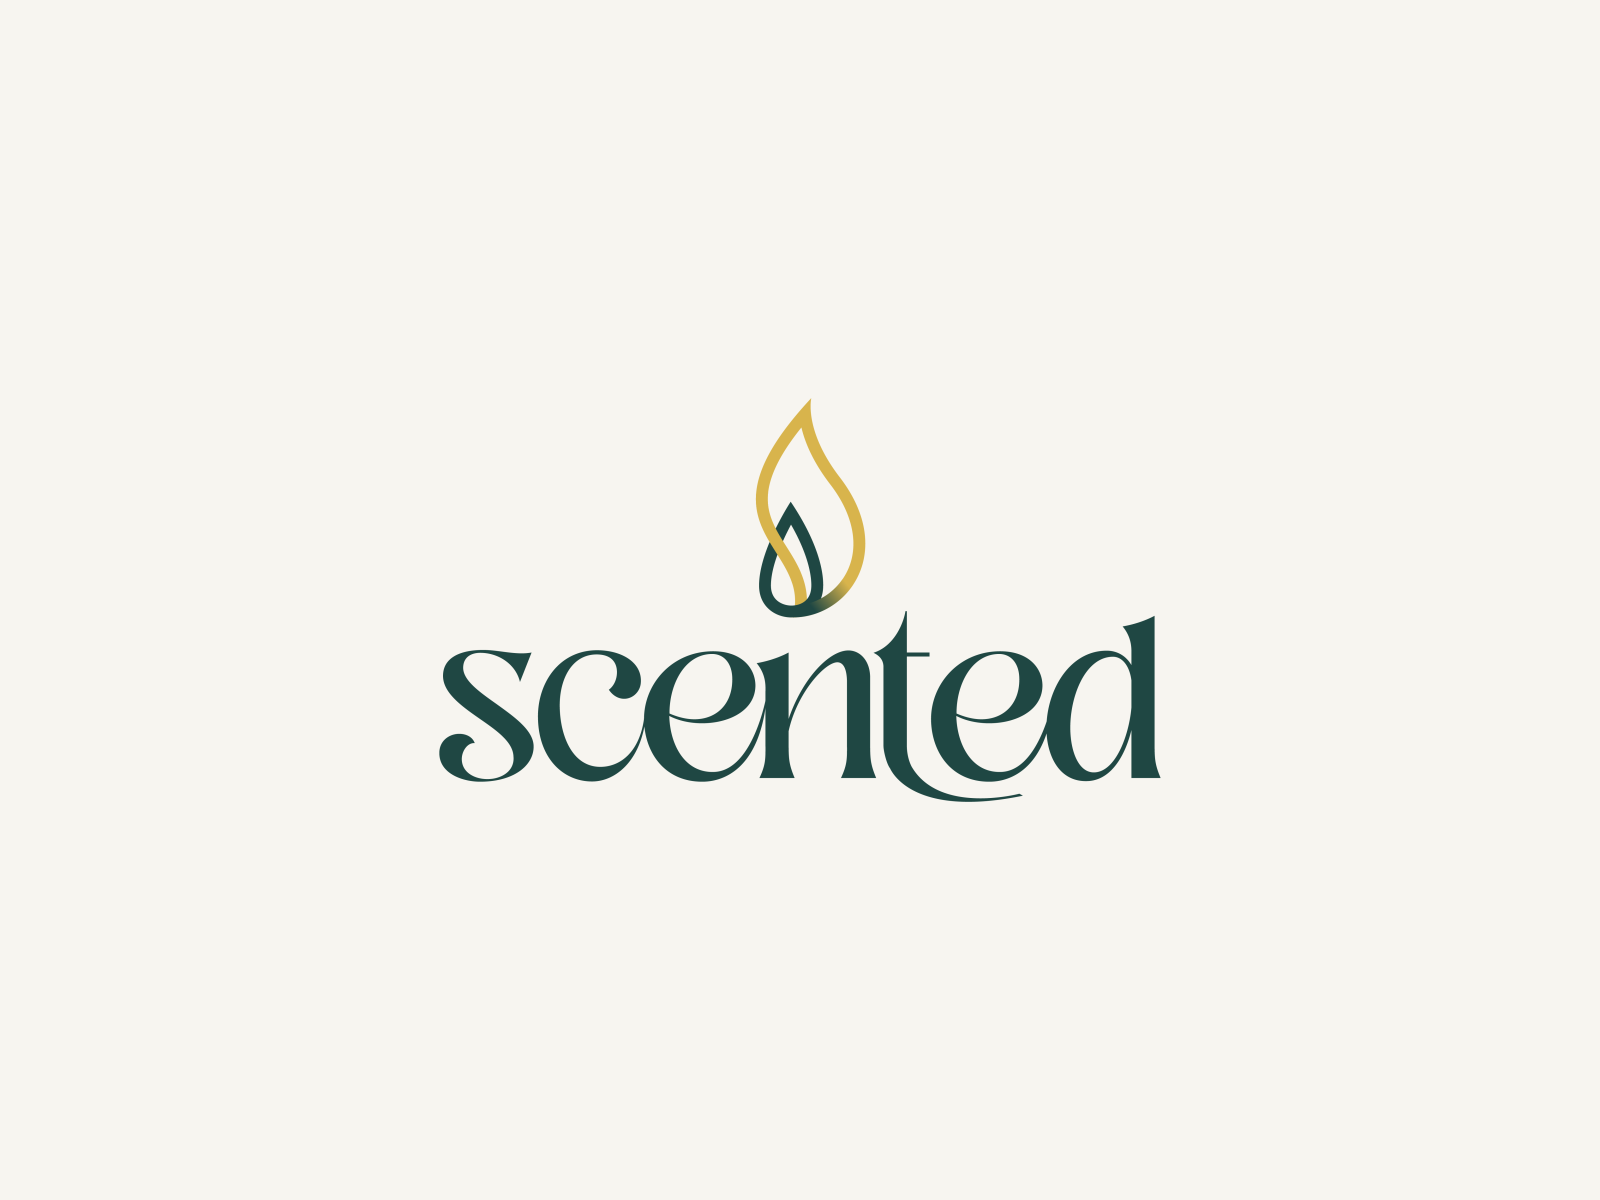 Scented Candles by Tea Tom on Dribbble